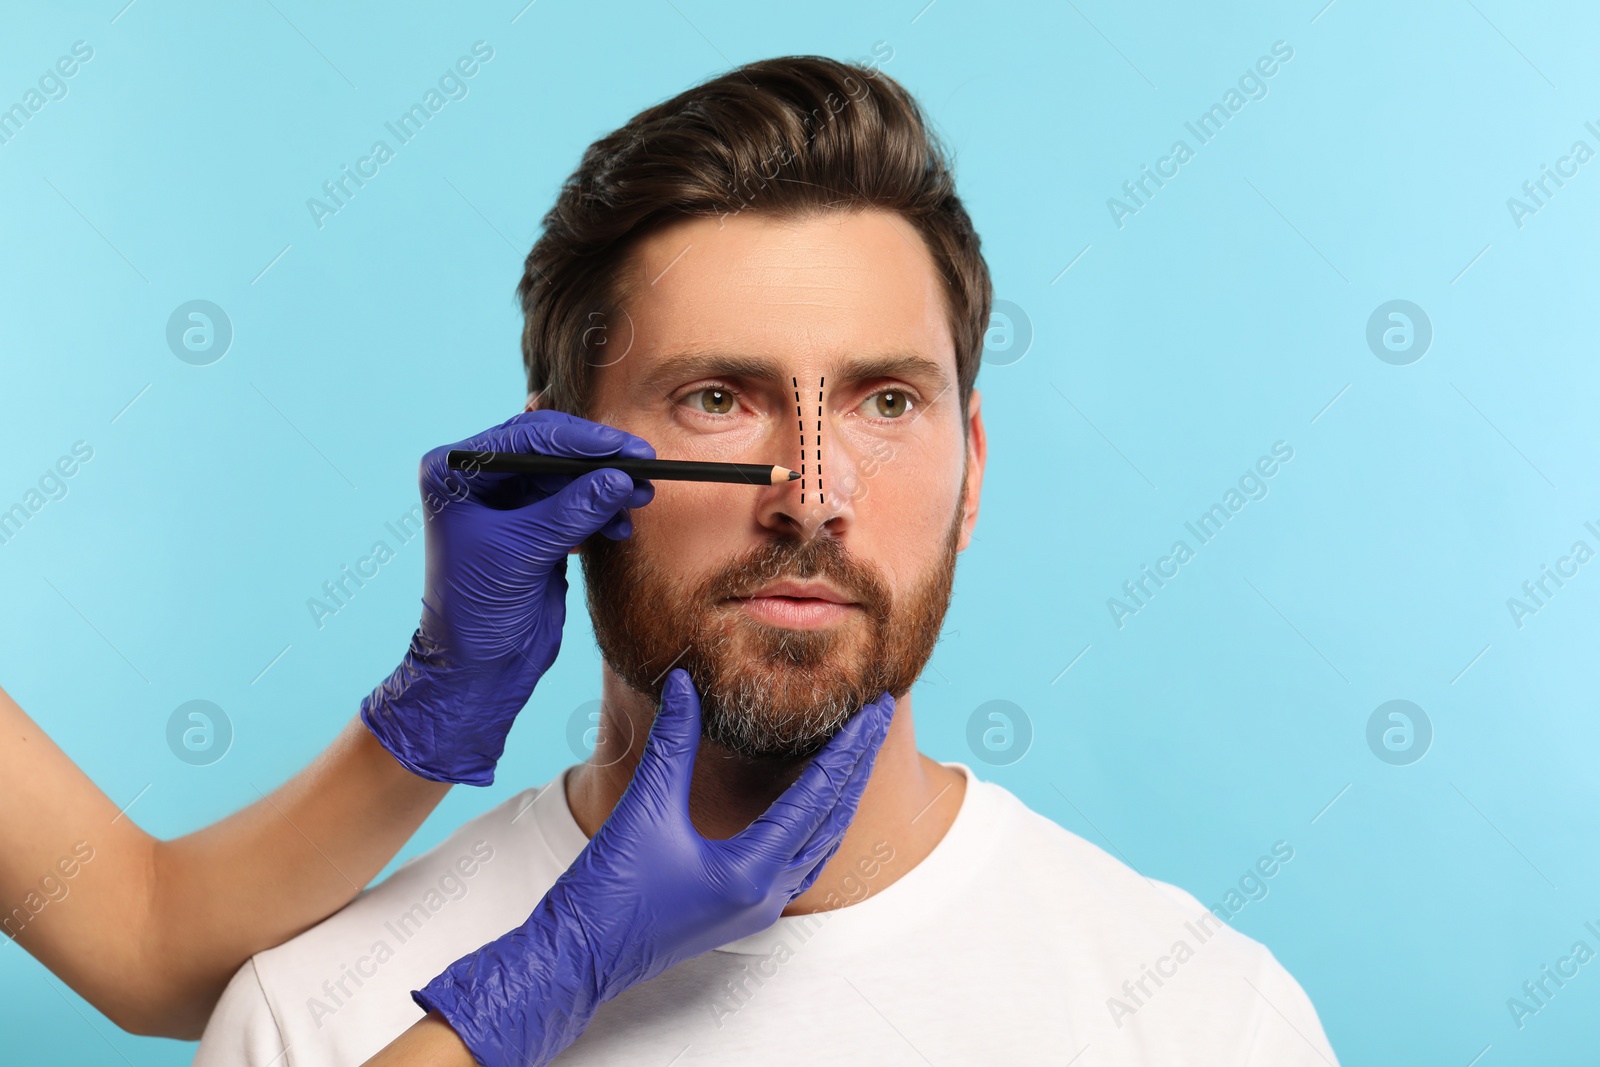 Image of Man preparing for cosmetic surgery, light blue background. Doctor drawing markings on his face, closeup